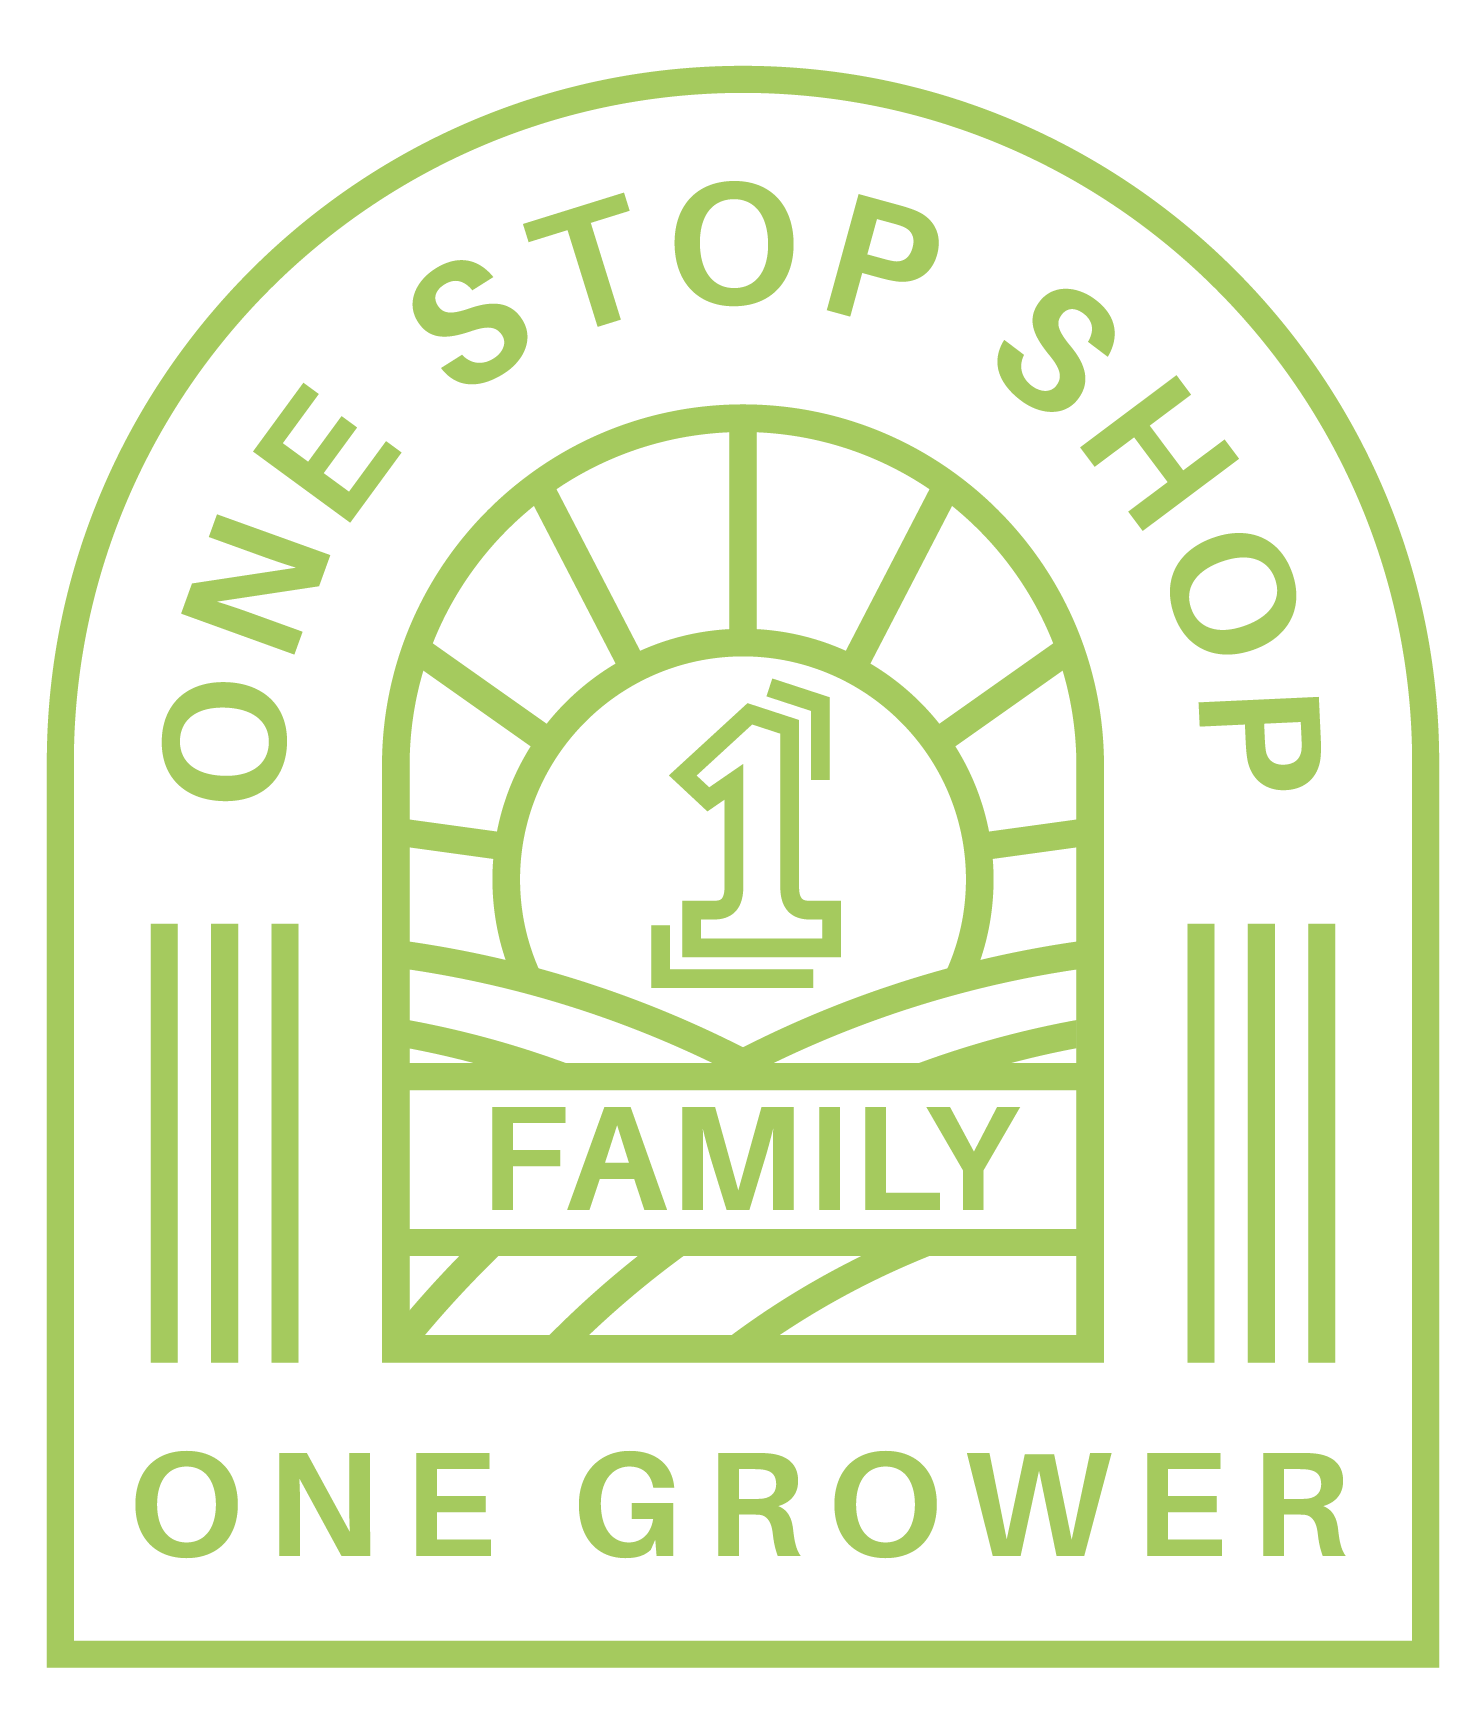 One Stop Shop One Grower 1 Family